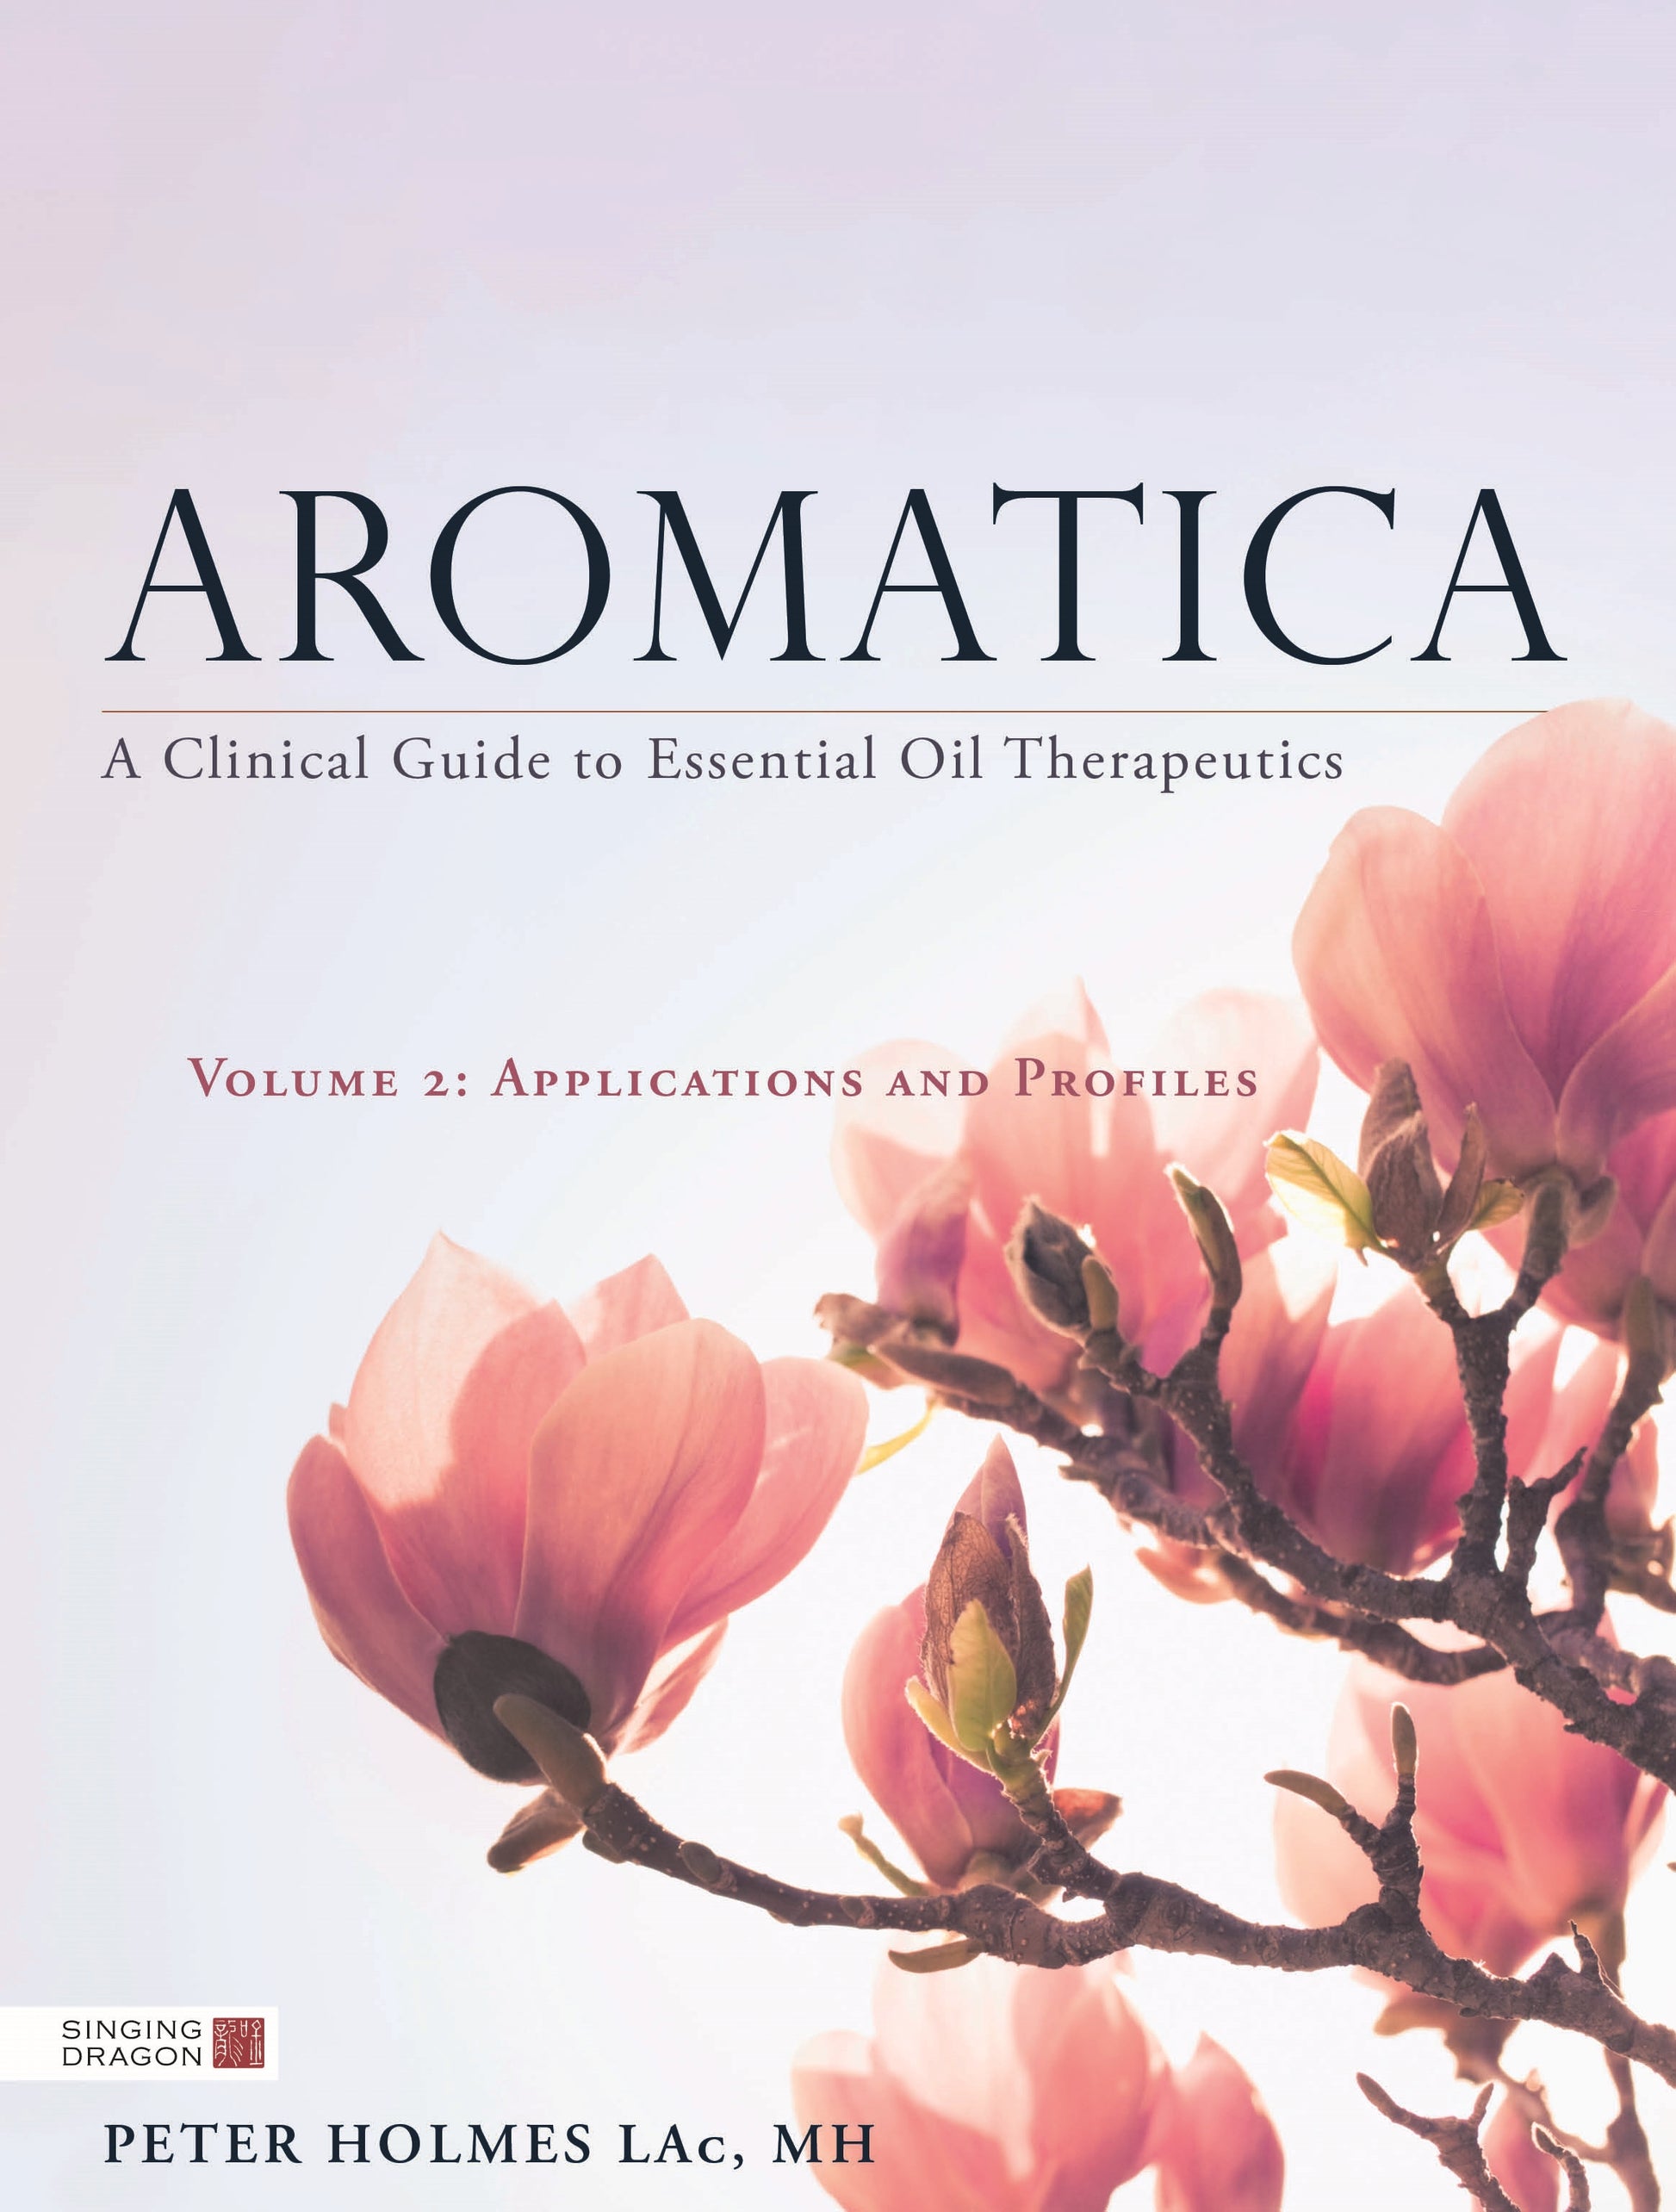 Aromatica Volume 2 by Peter Holmes